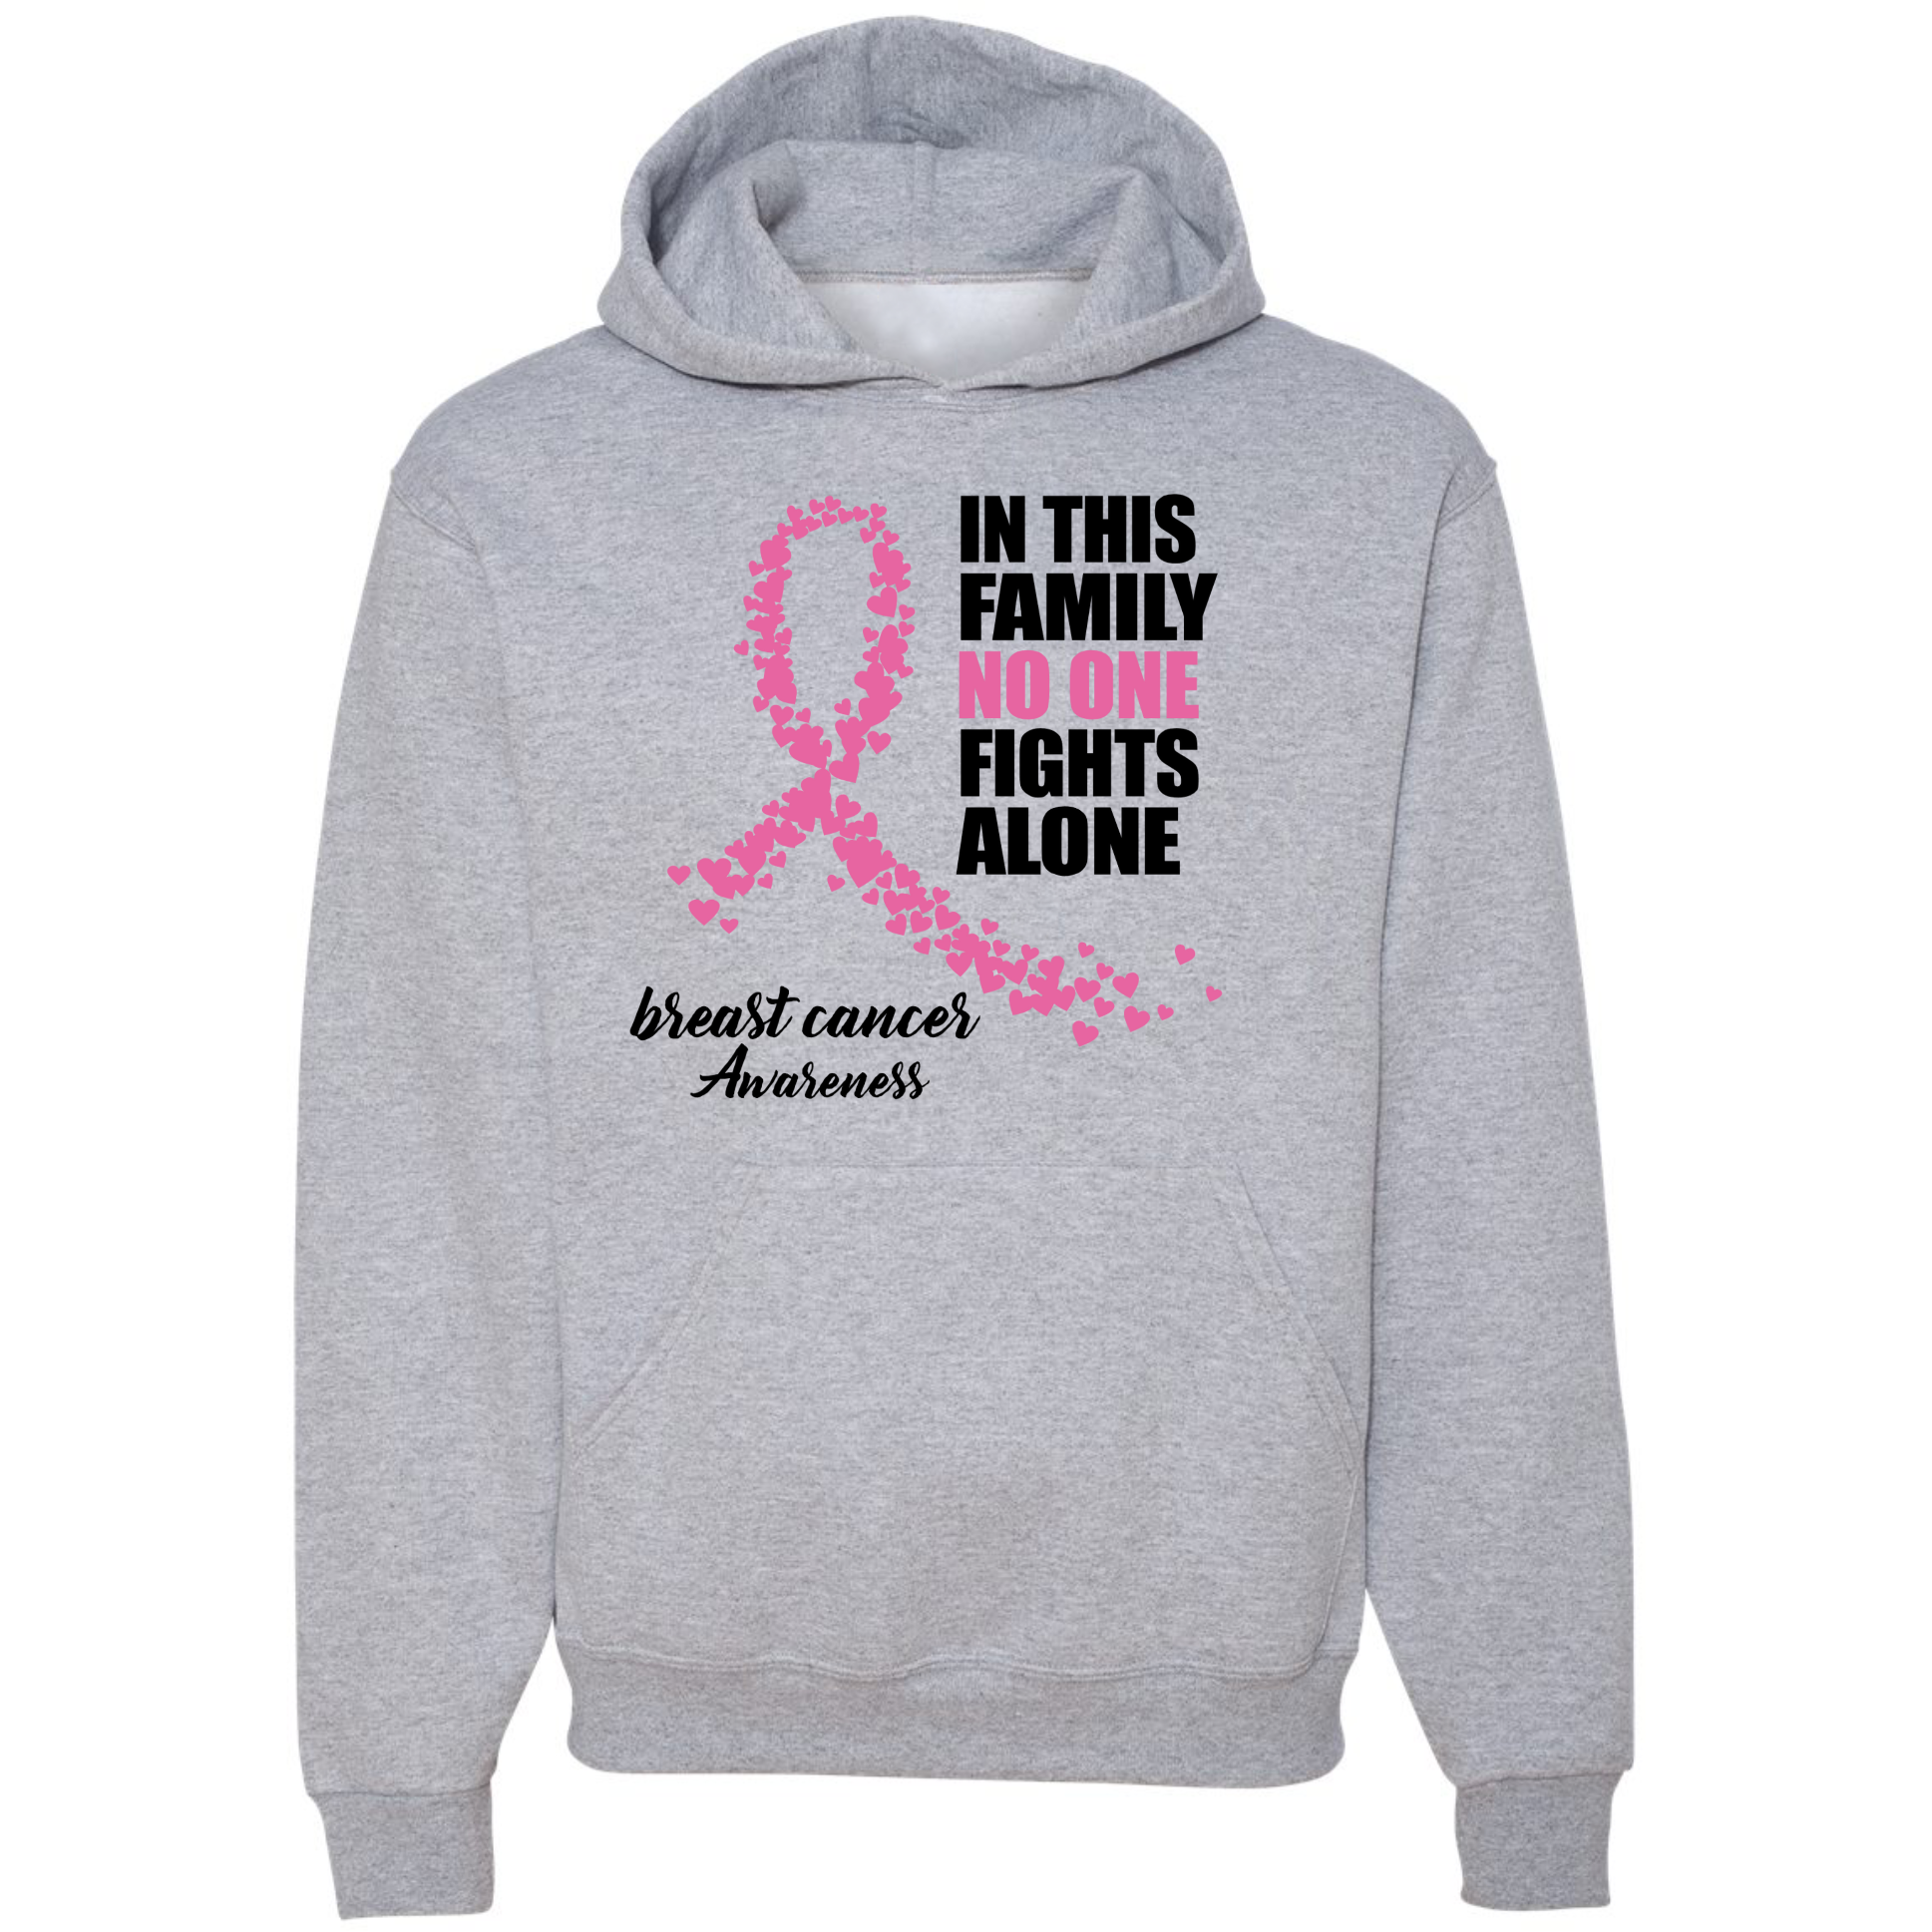 No One Fights Alone Breast Cancer Awareness Gray Hoodie - Inspire Me Positive